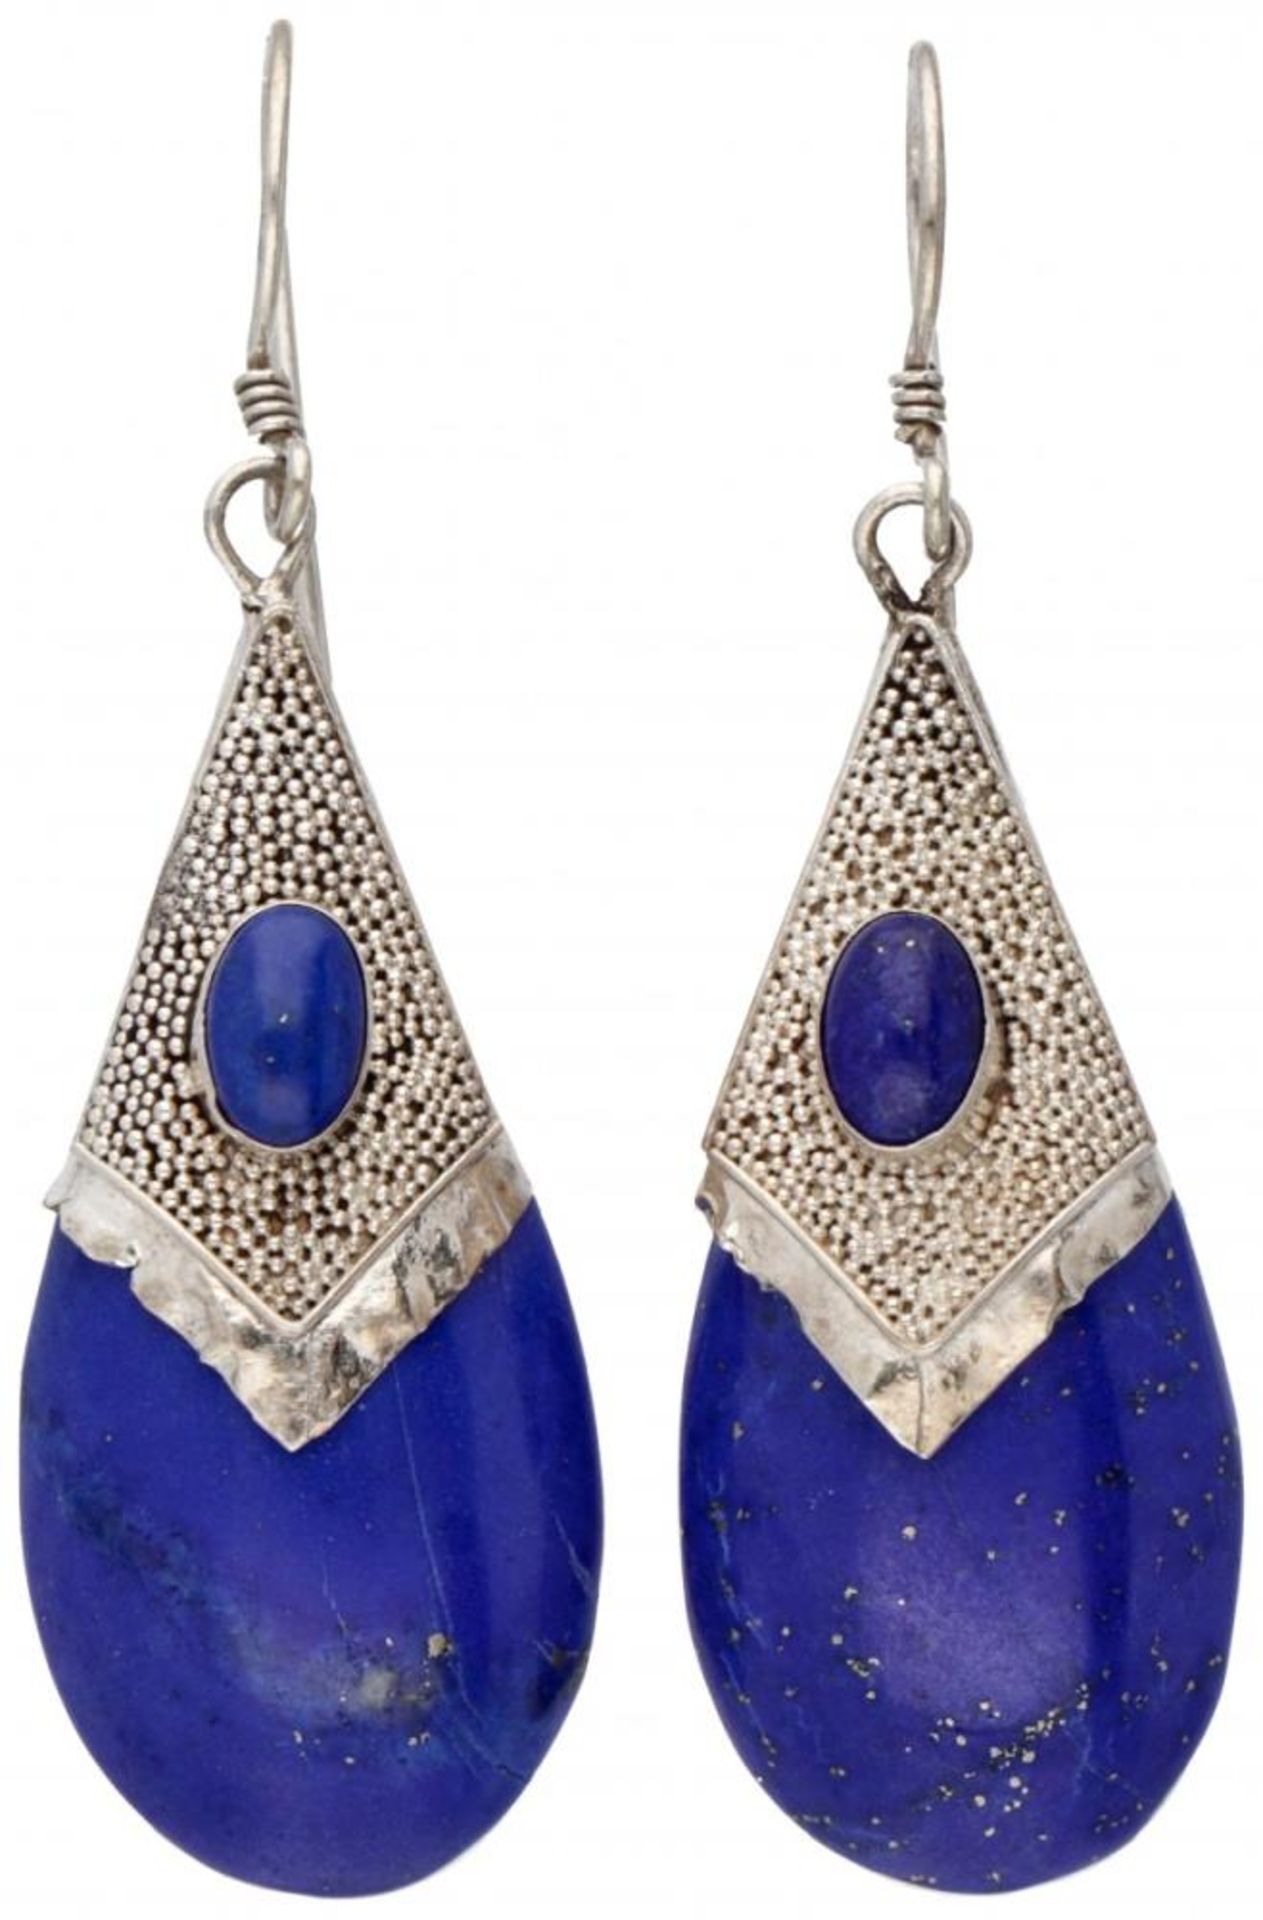 Sterling silver earrings set with lapis lazuli.